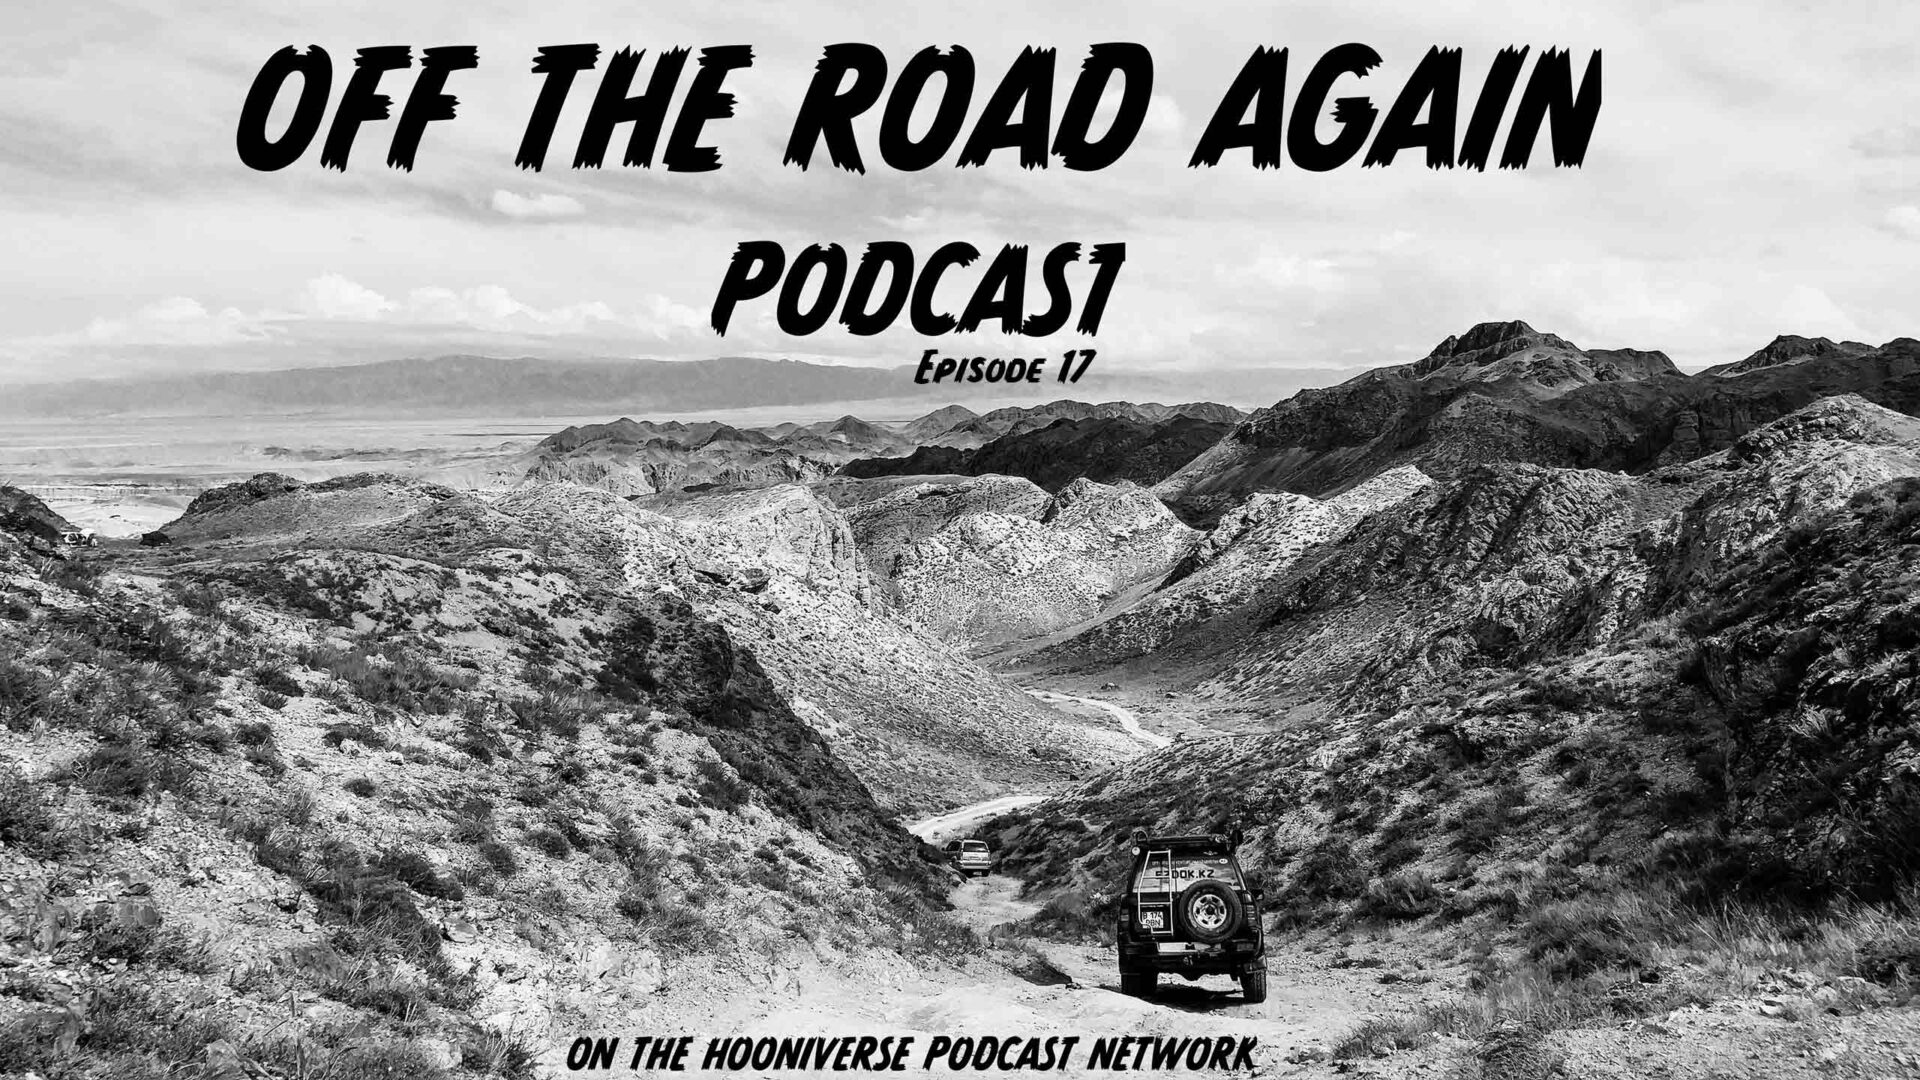 Off The Road Again Podcast - Episode 17